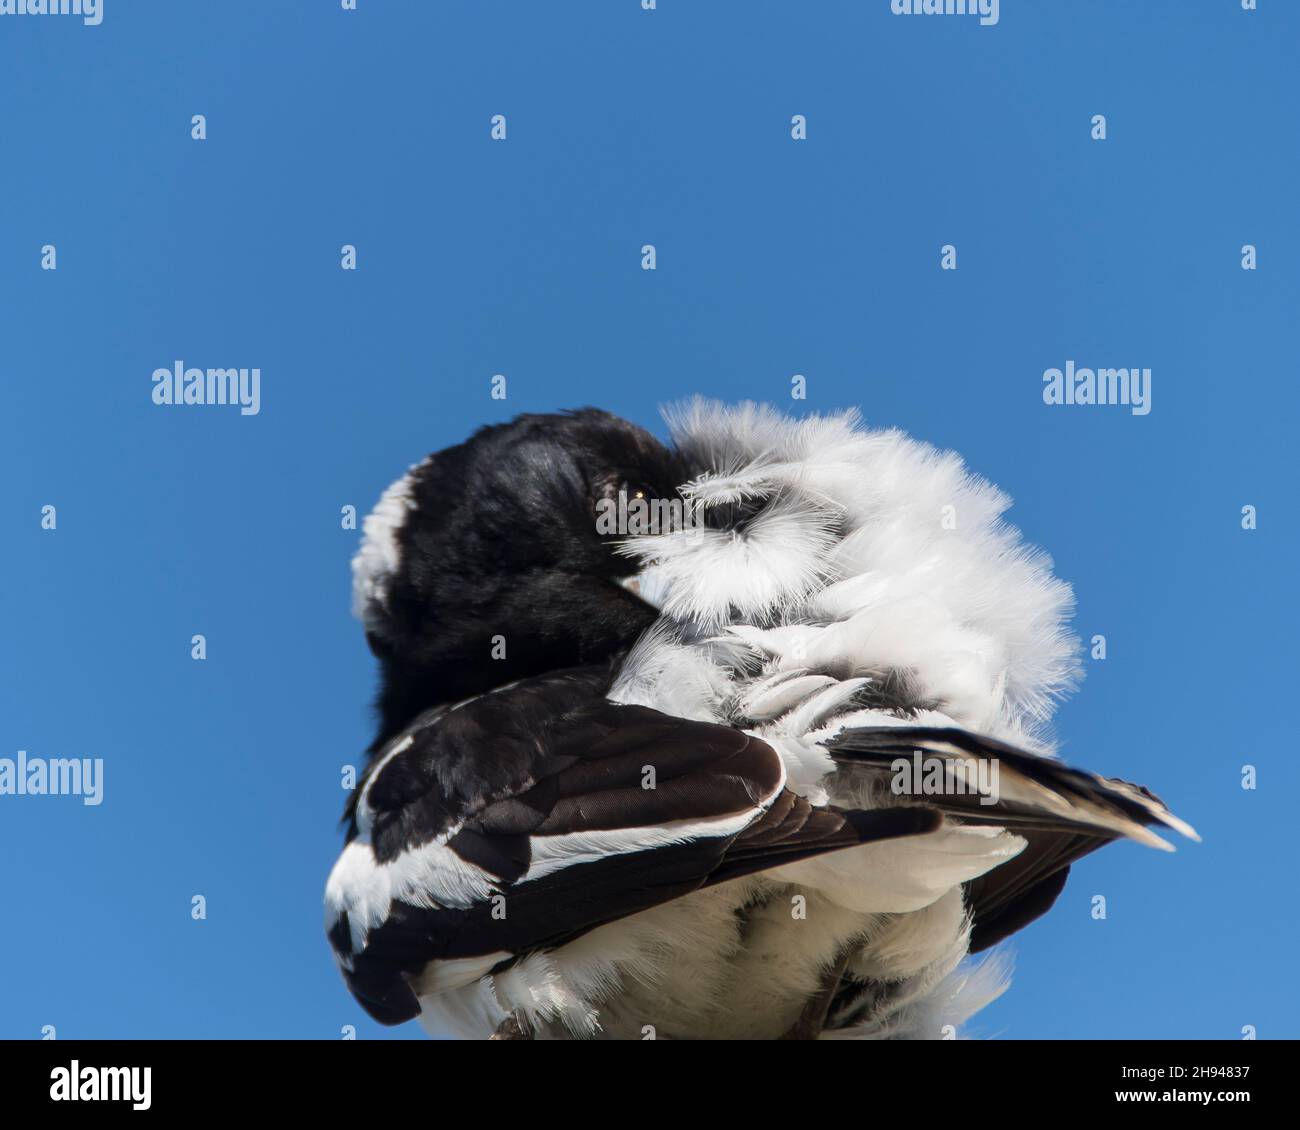 Bundle of black and white feathers. Australian pied butcherbird (Cracticus nigrogularis) perched and preening against blue sky. Queensland. Copy space Stock Photo